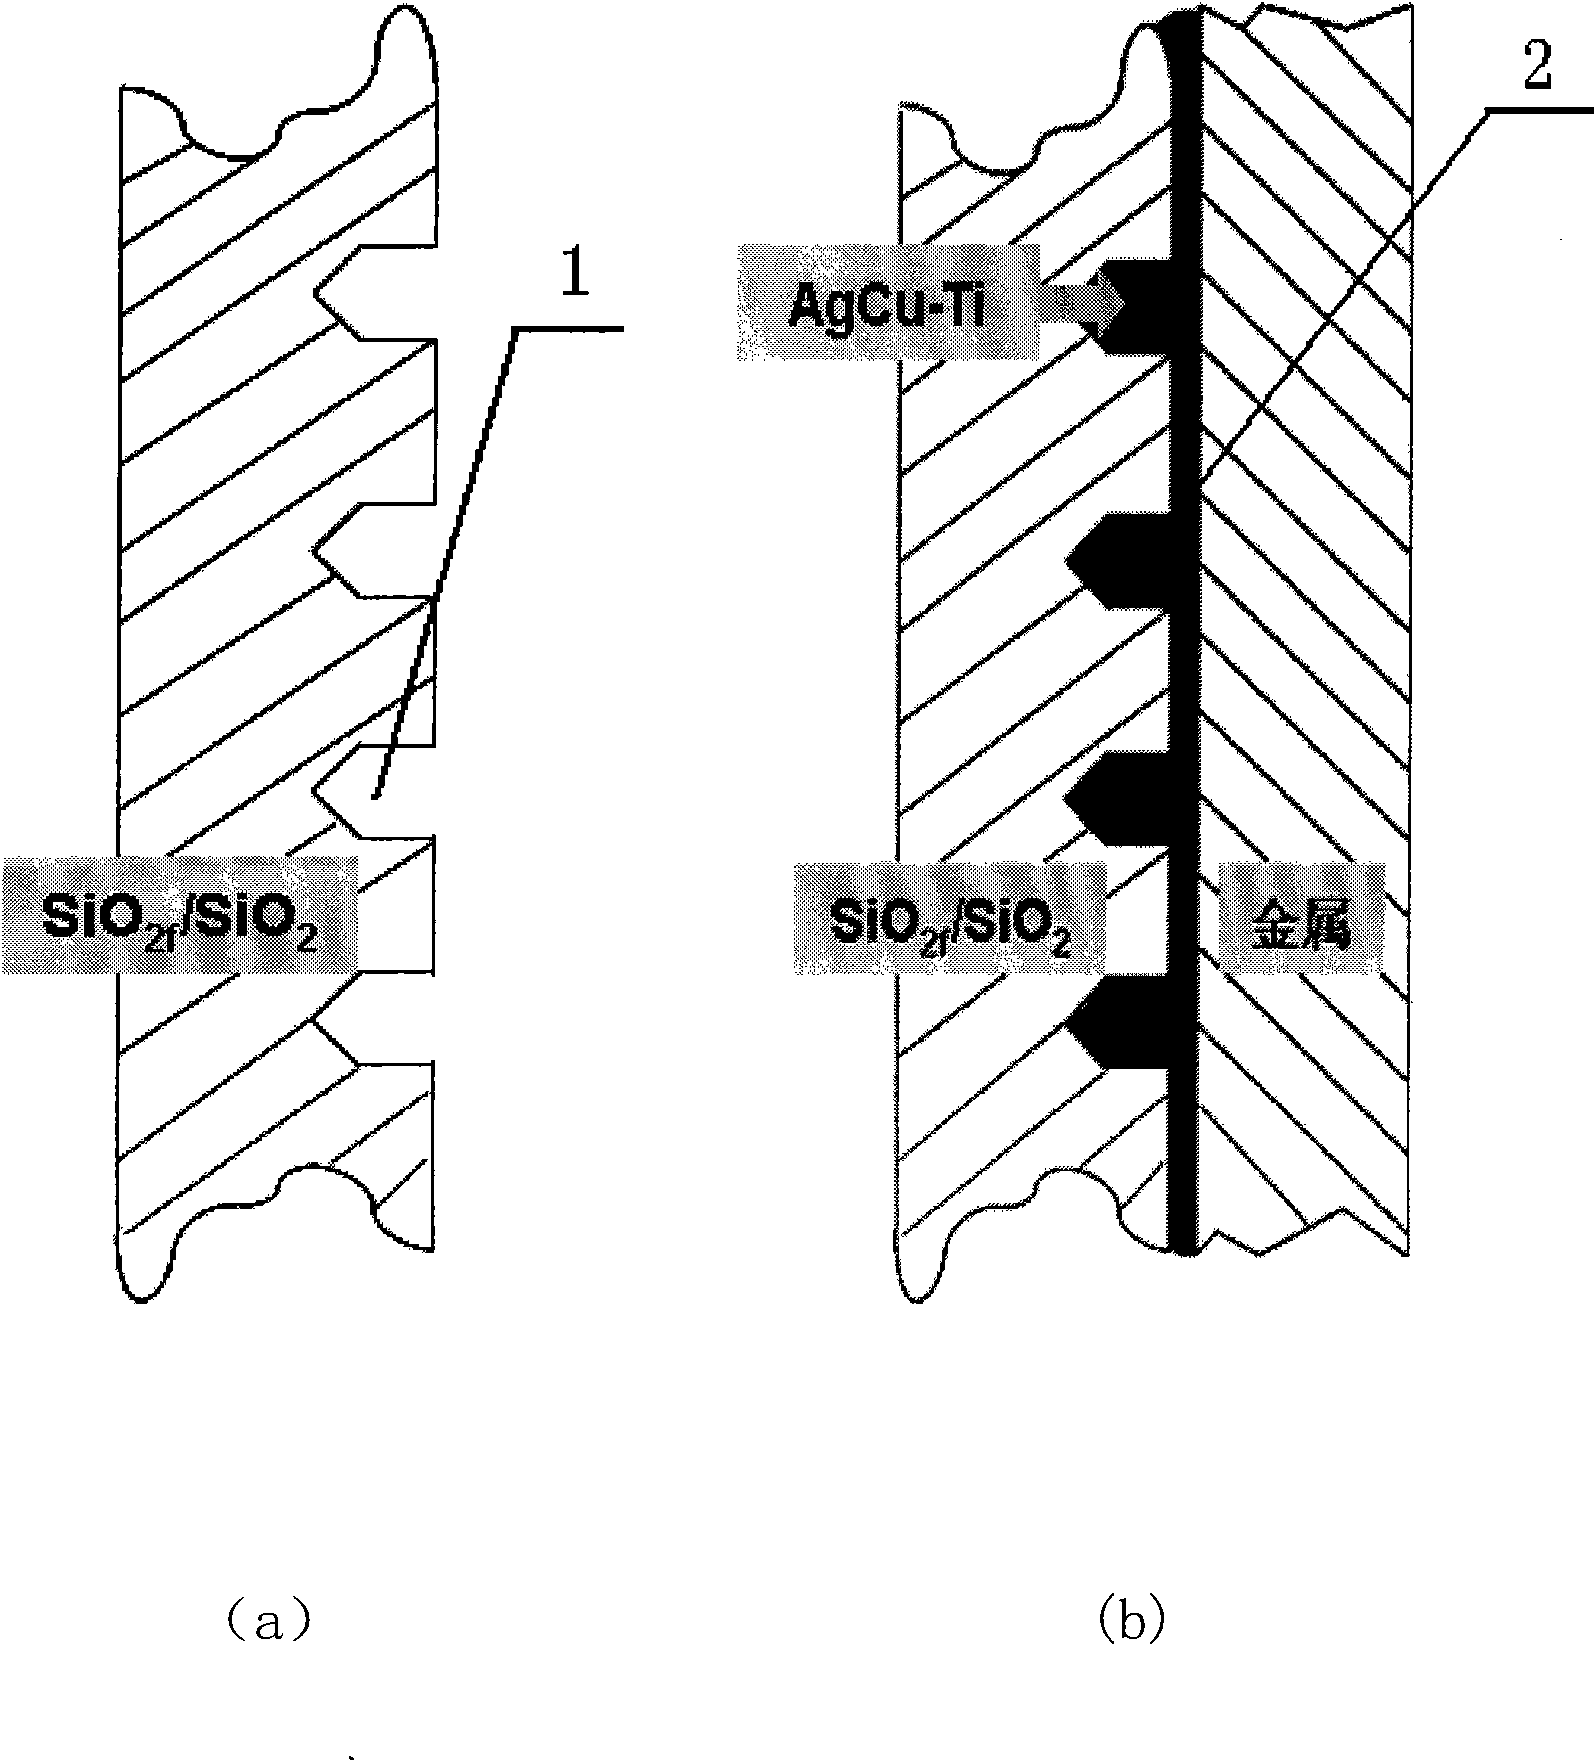 Process for soldering SiO2f/SiO2 composite ceramic and metal material